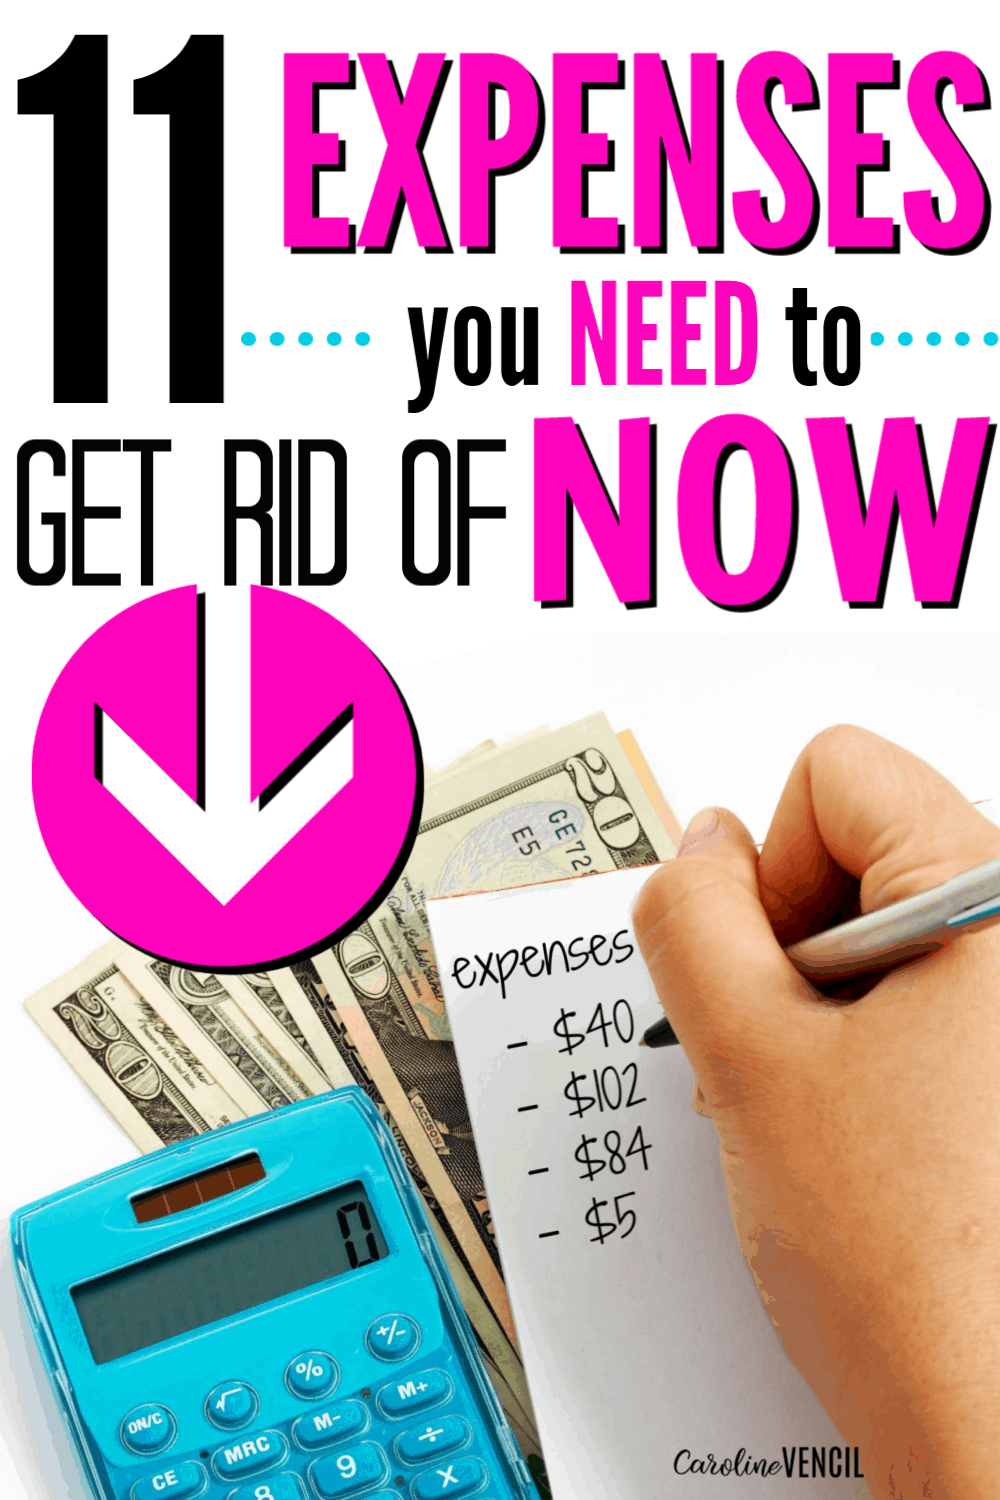 Expenses to Stop Spending Money on to Save Money and Live Frugally. How to start saving and stop spending money for beginners who need to find new ways to save and tips and tricks and ideas on how to live frugally.